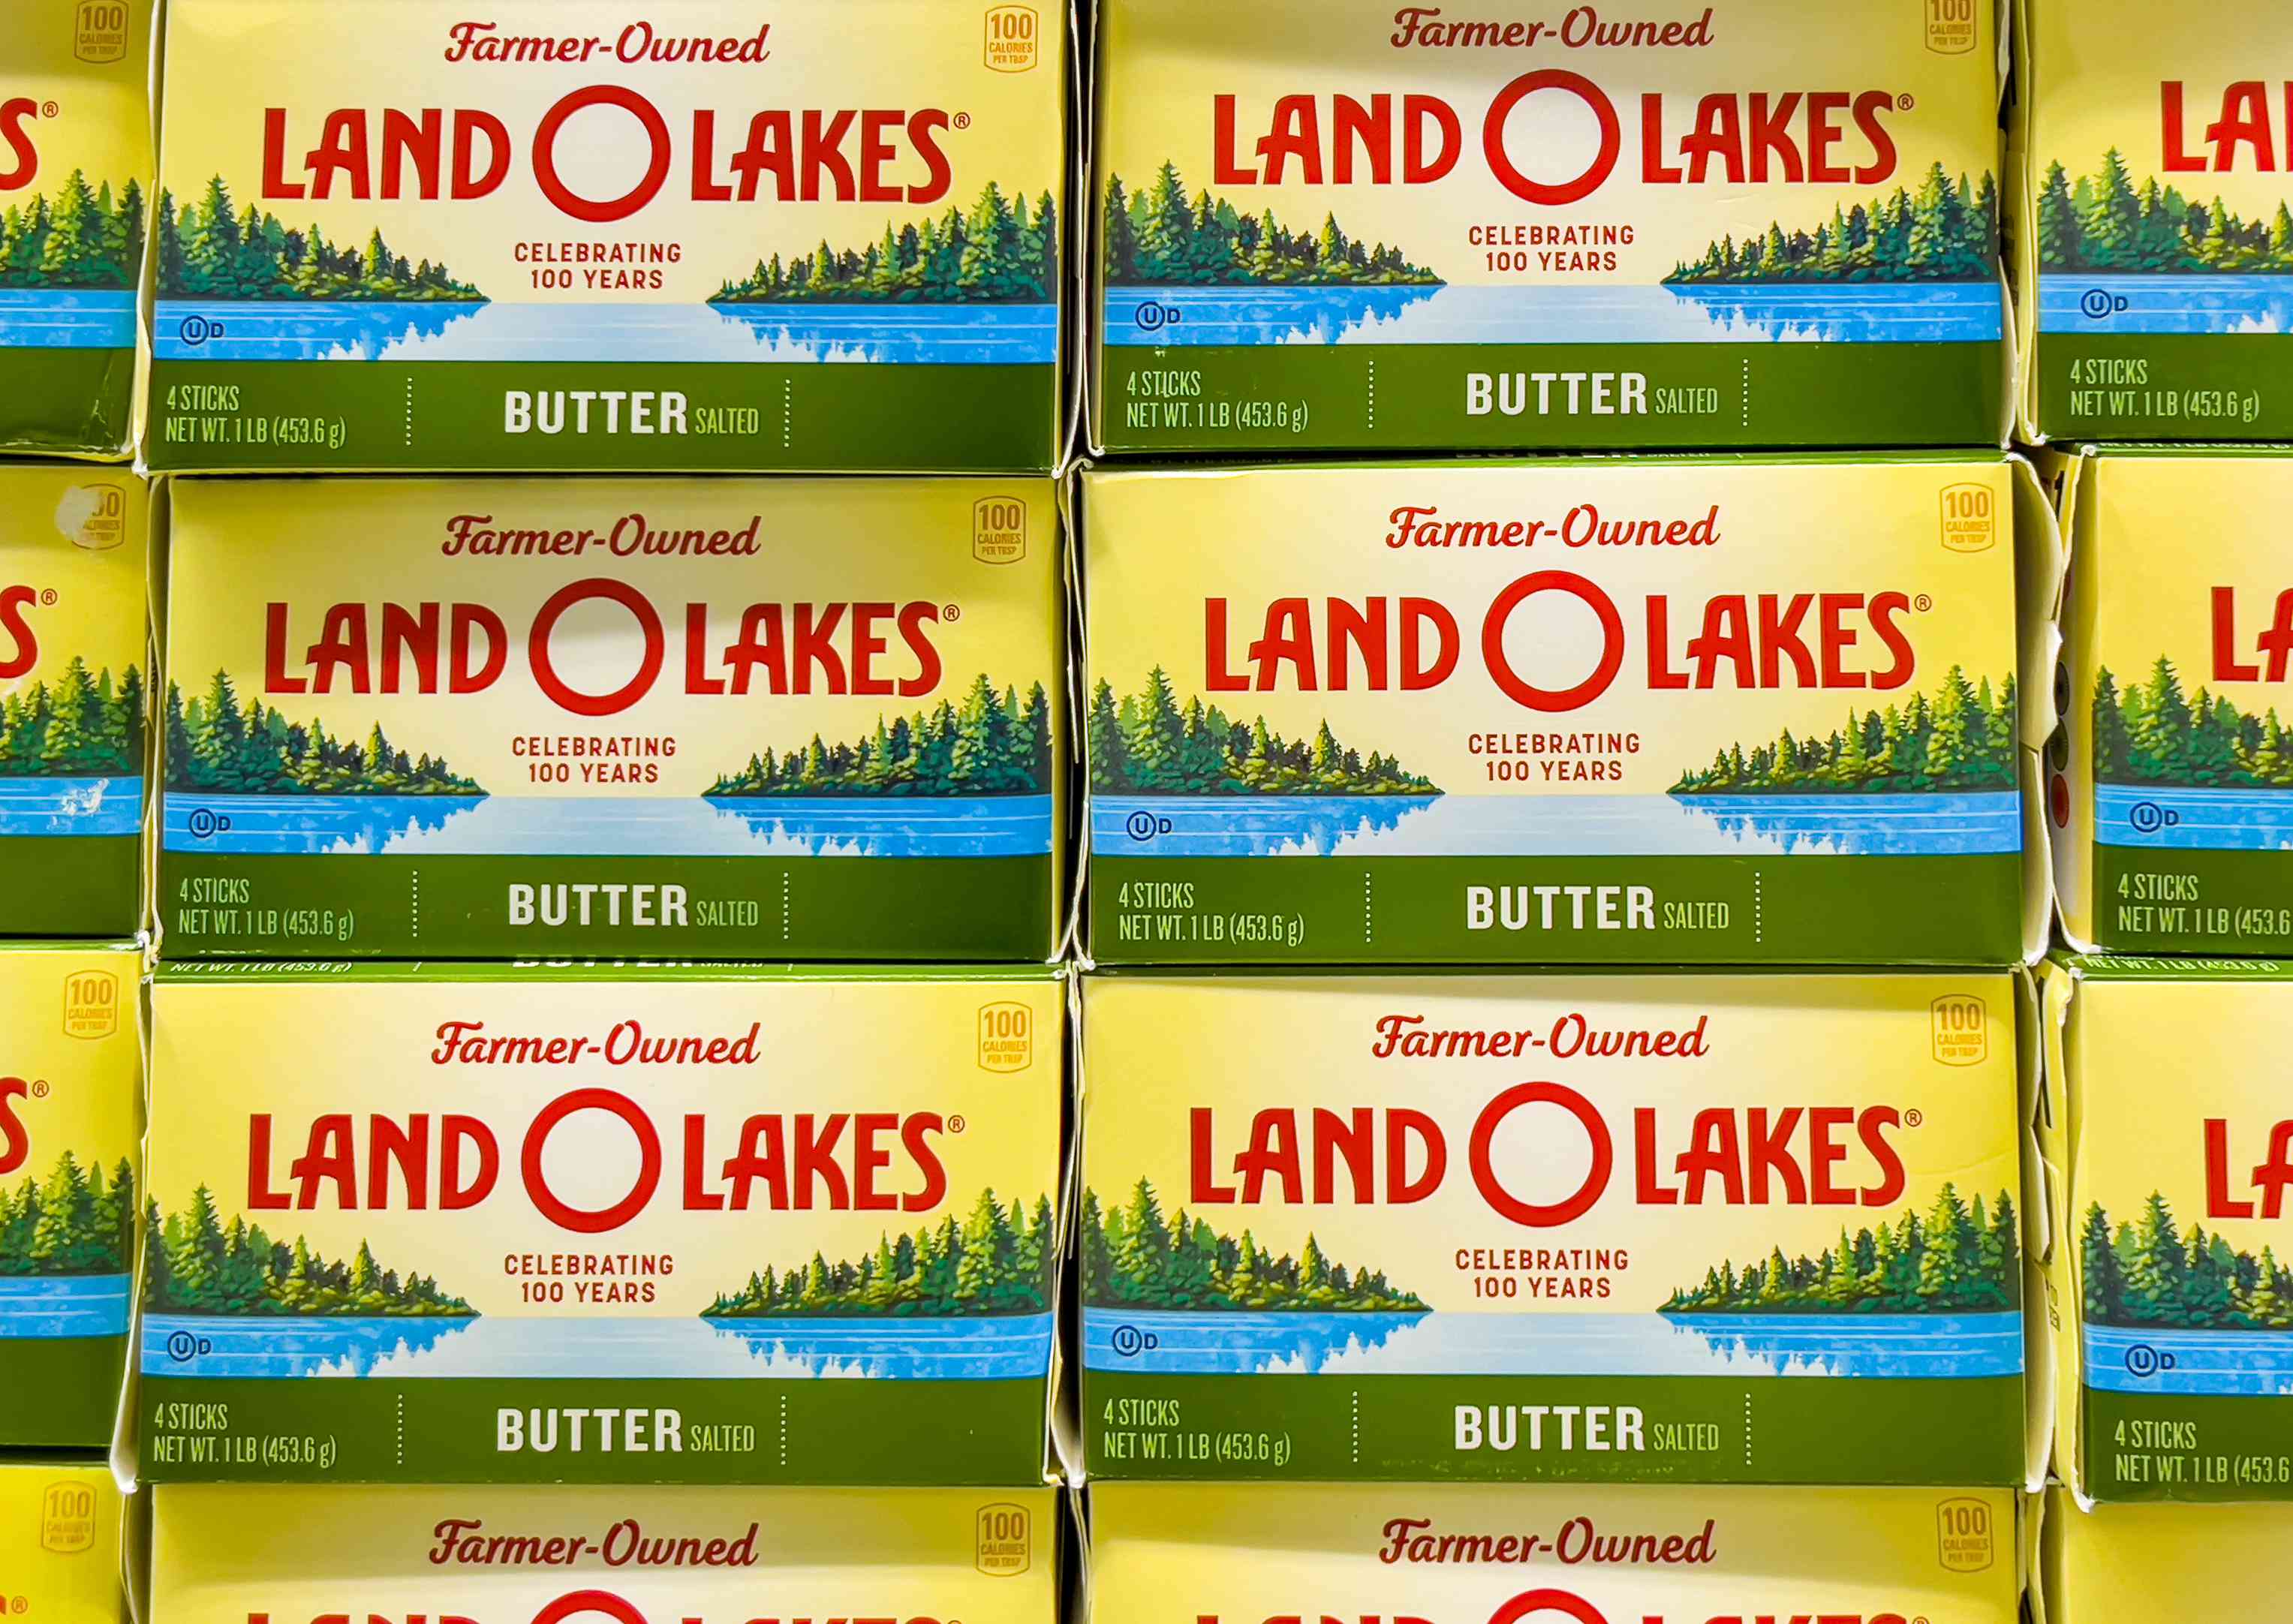 this is how long you can leave butter on the counter, according to land o'lakes